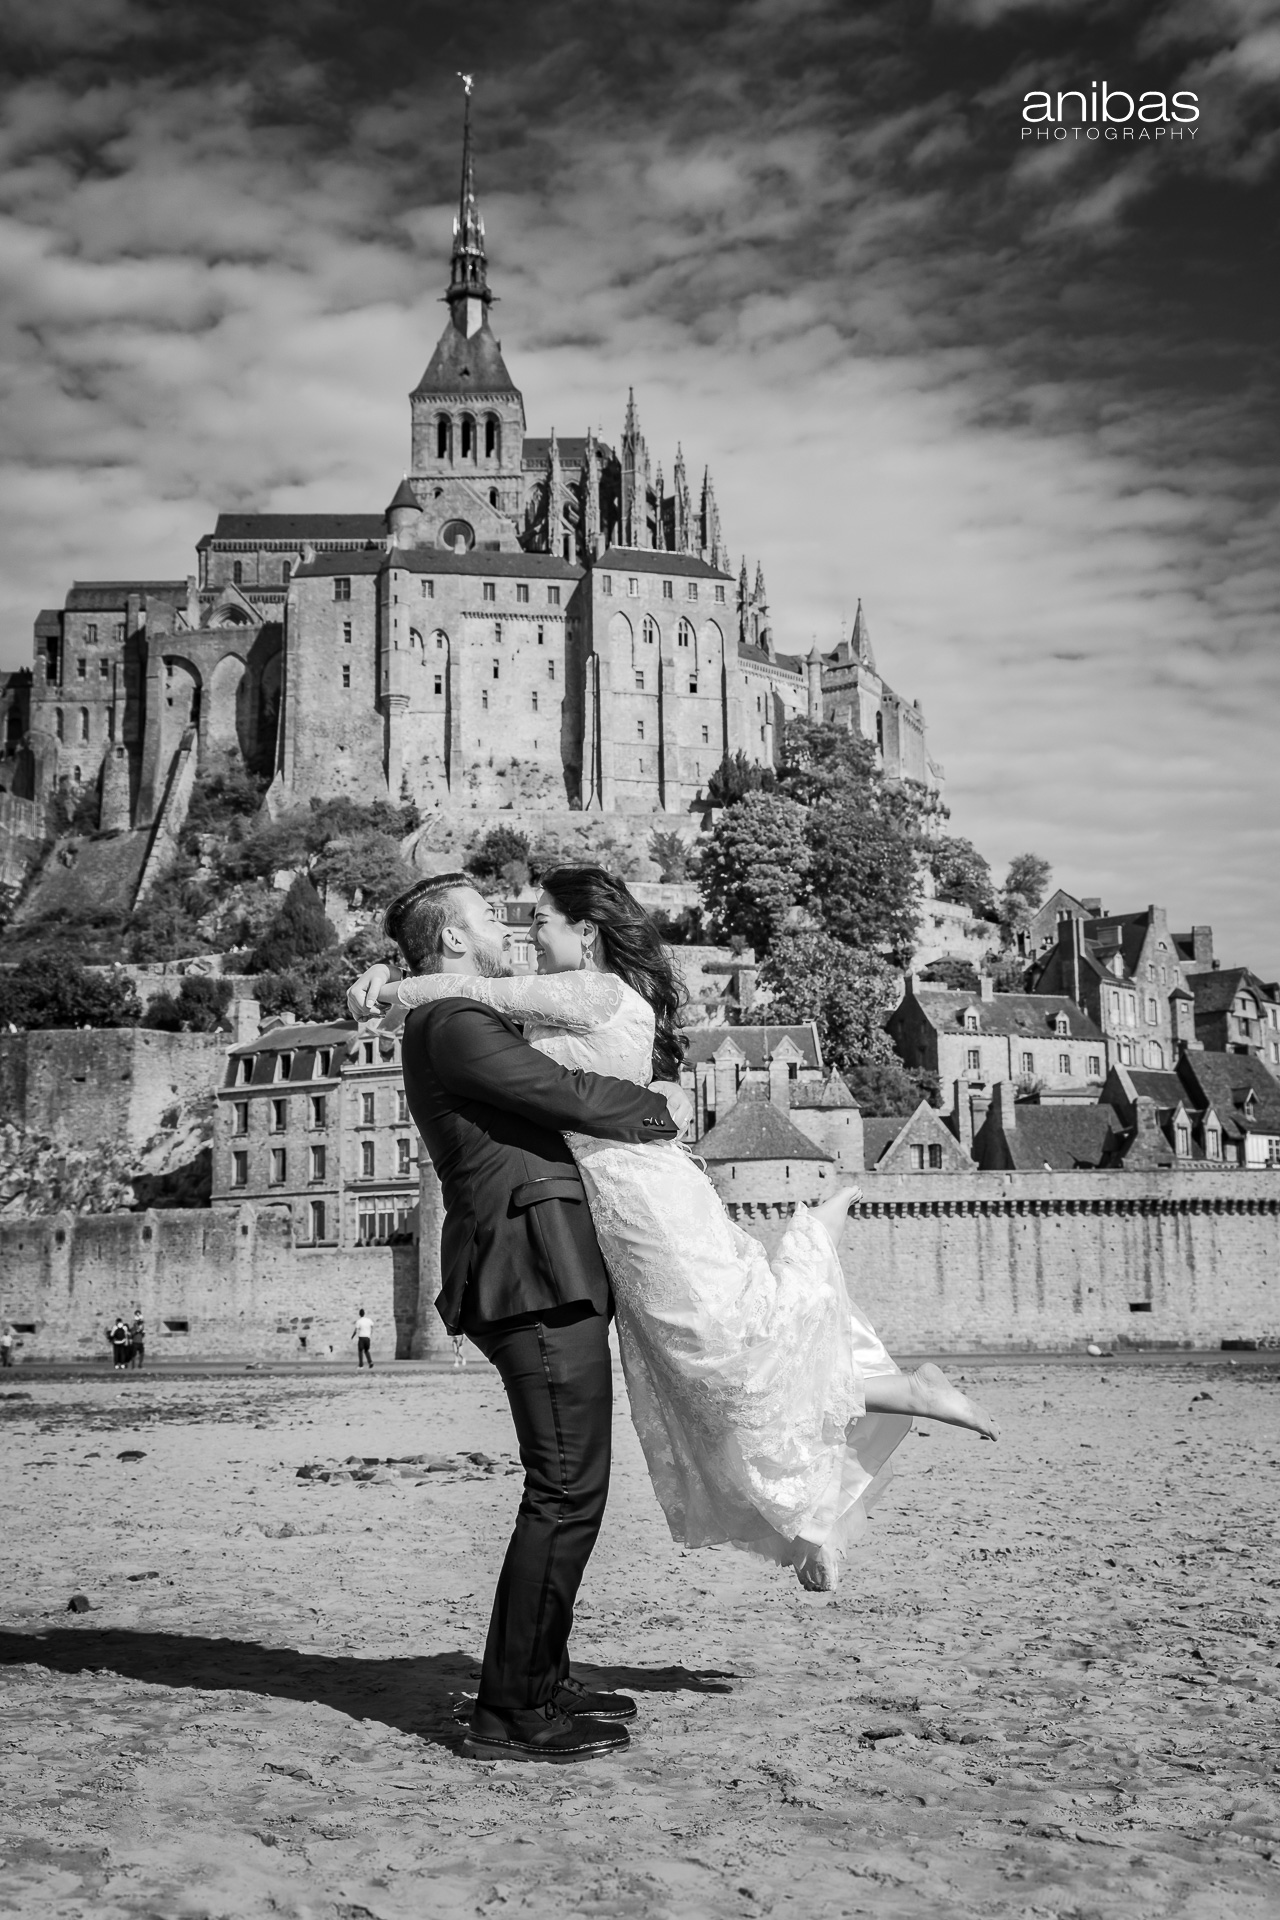 Sabina, Destination Wedding Photographer in Normandy or further afield in France